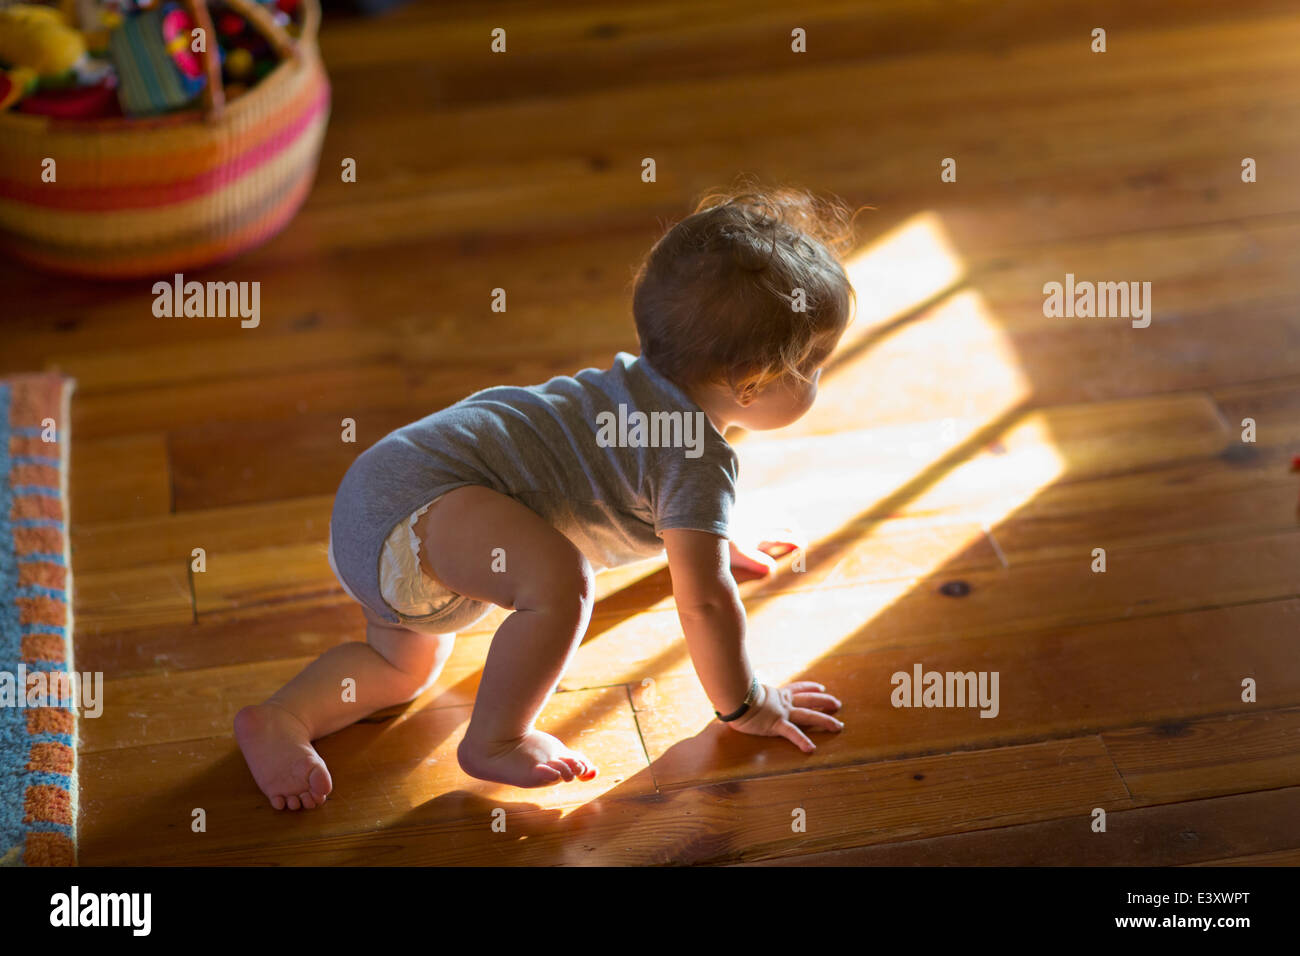 Caucasian baby crawling on floor Banque D'Images